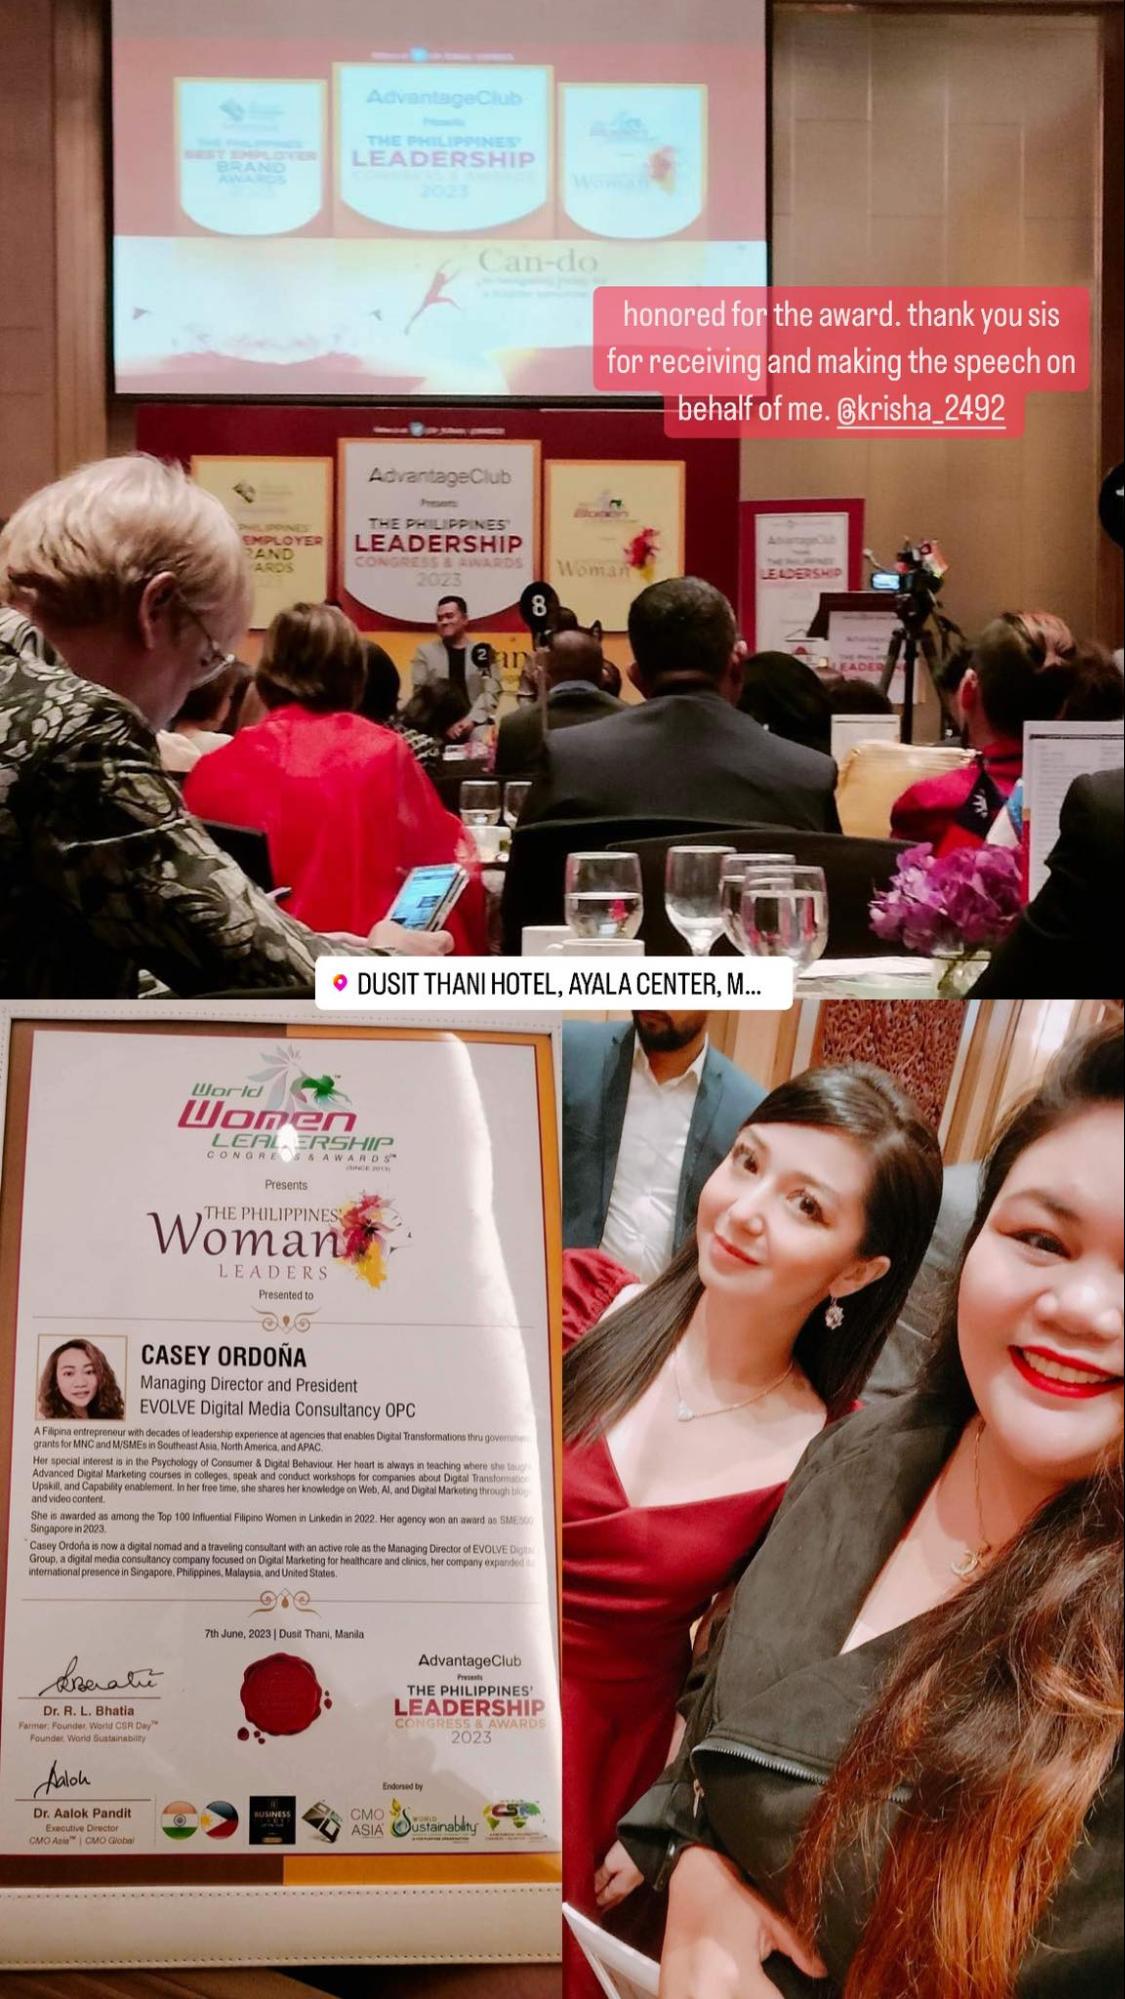 In recognition of her outstanding achievements, Casey Cordona's journey as one of the Philippines' Woman Leaders